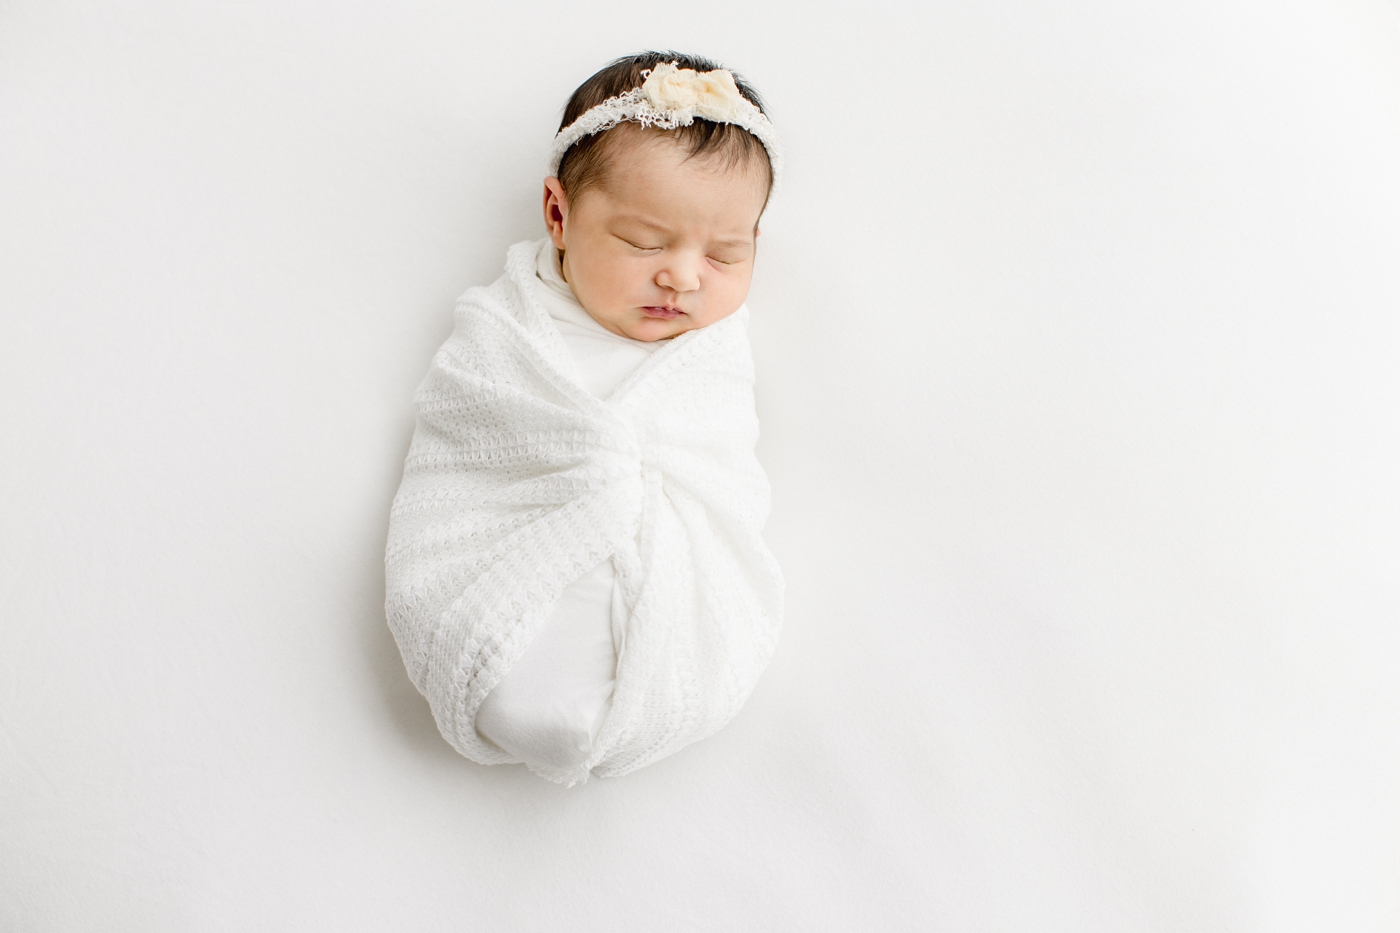 Baby wrapped in white knit swaddle and sleeping during studio newborn session in Cedar Park TX.Photo by Sana Ahmed Photography.